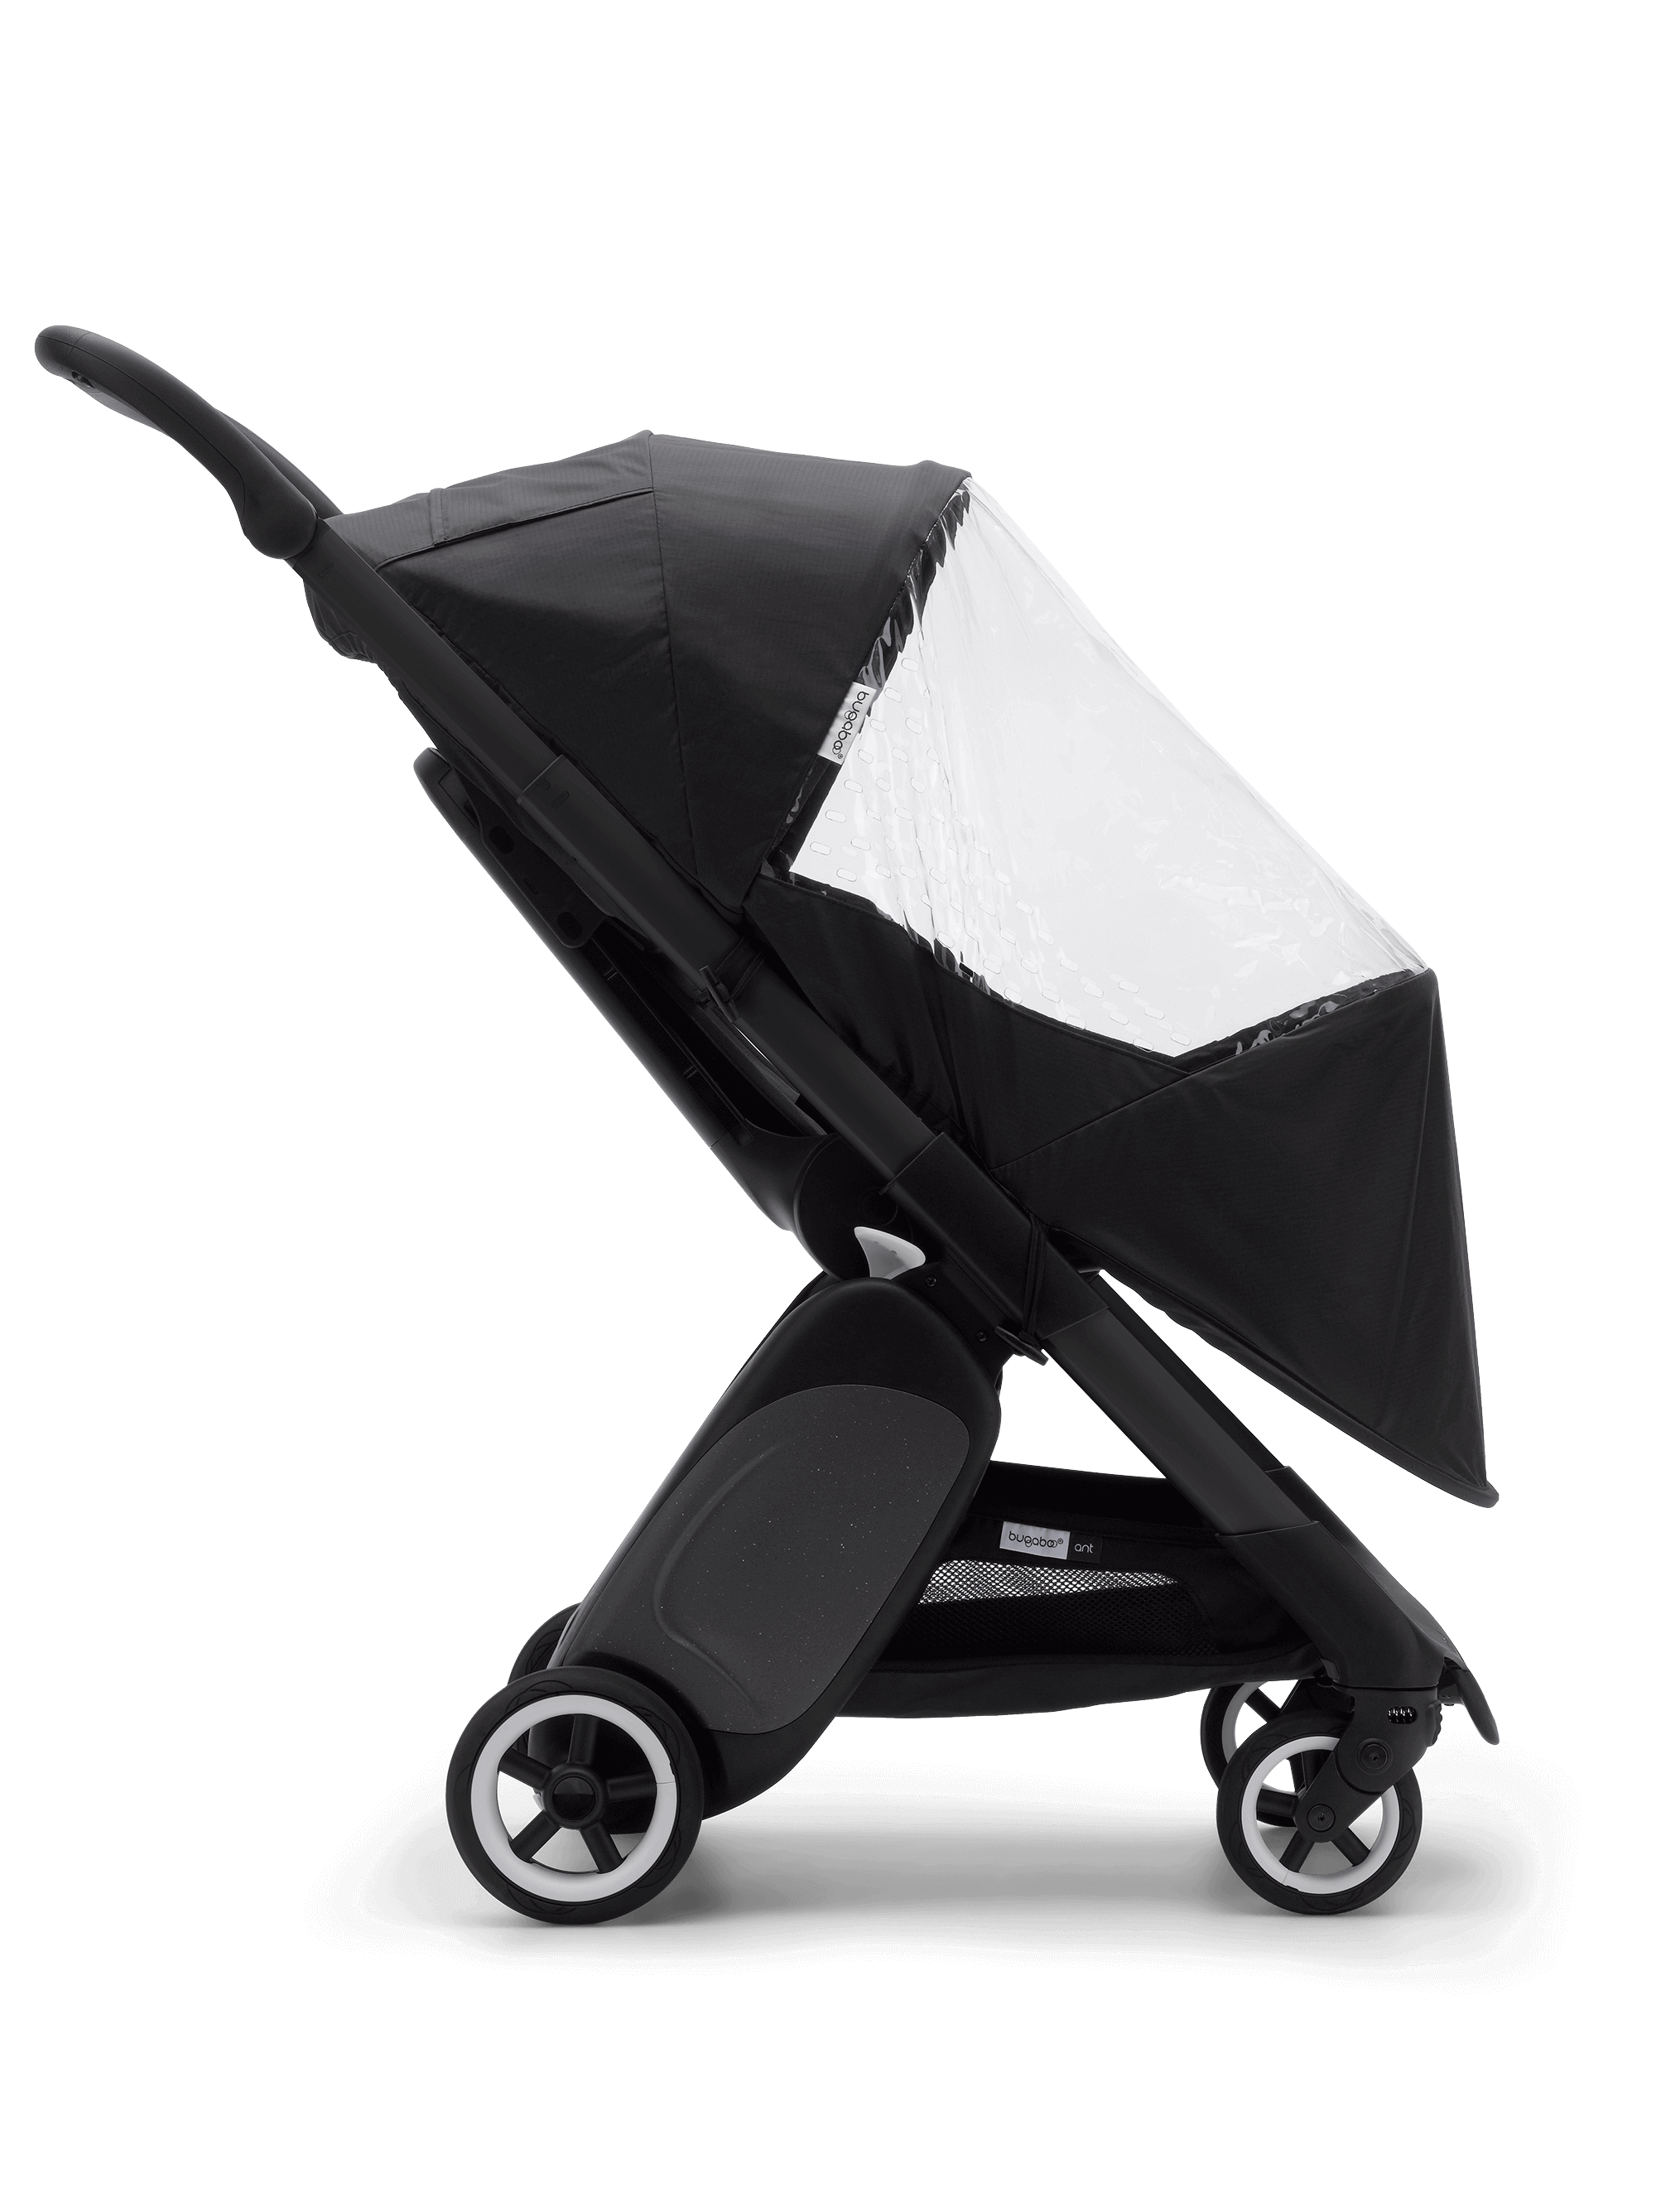 Koodee Raincover Designed to fit BUGABOO BUFFALO SEAT UNIT Made in the UK 